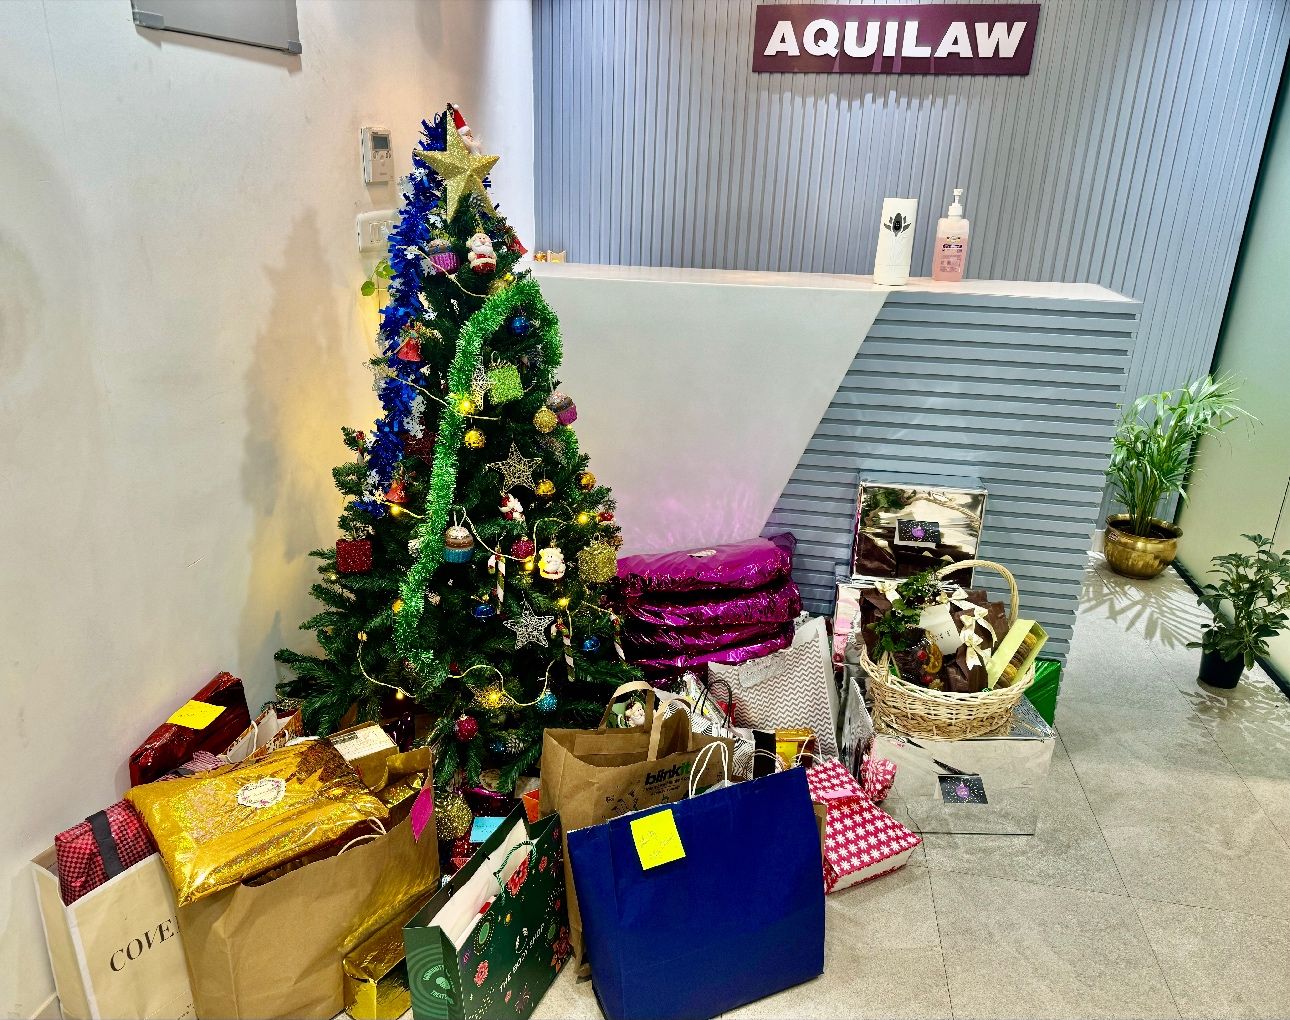 Christmas at AQUILAW has become a tradition of joy, collegiality, camaraderie, fun music, great food & the best Secret Santa !